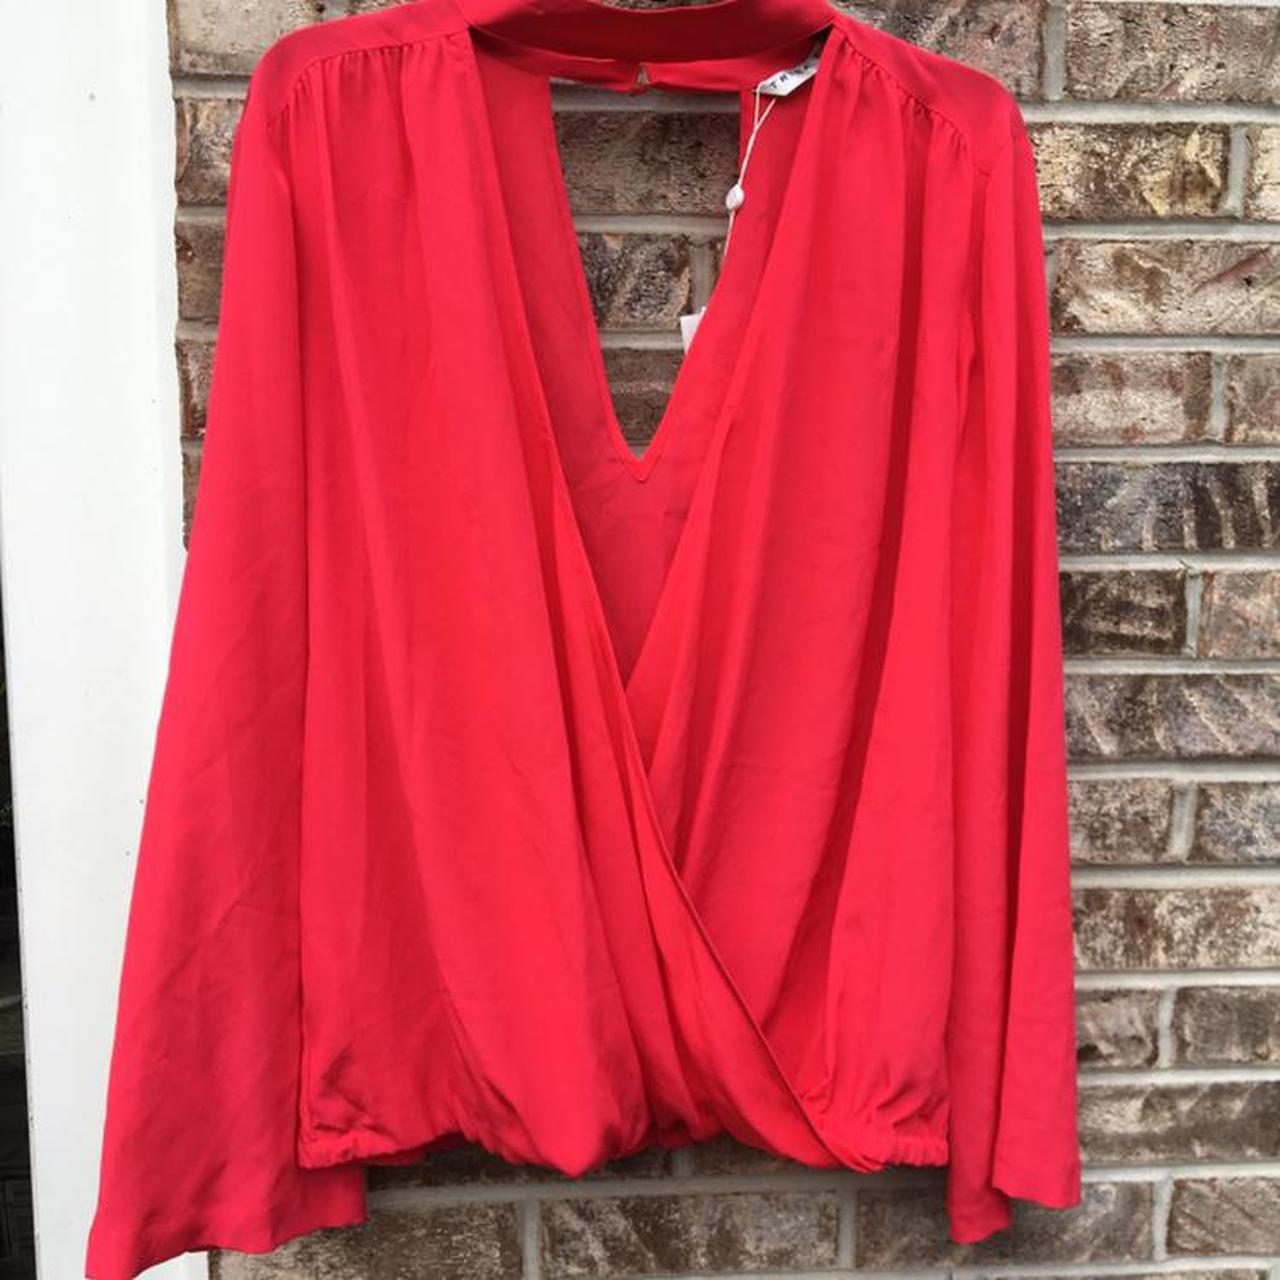 Product Image 4 - Hot pink/cherry draped top
Long sleeves
Plunging